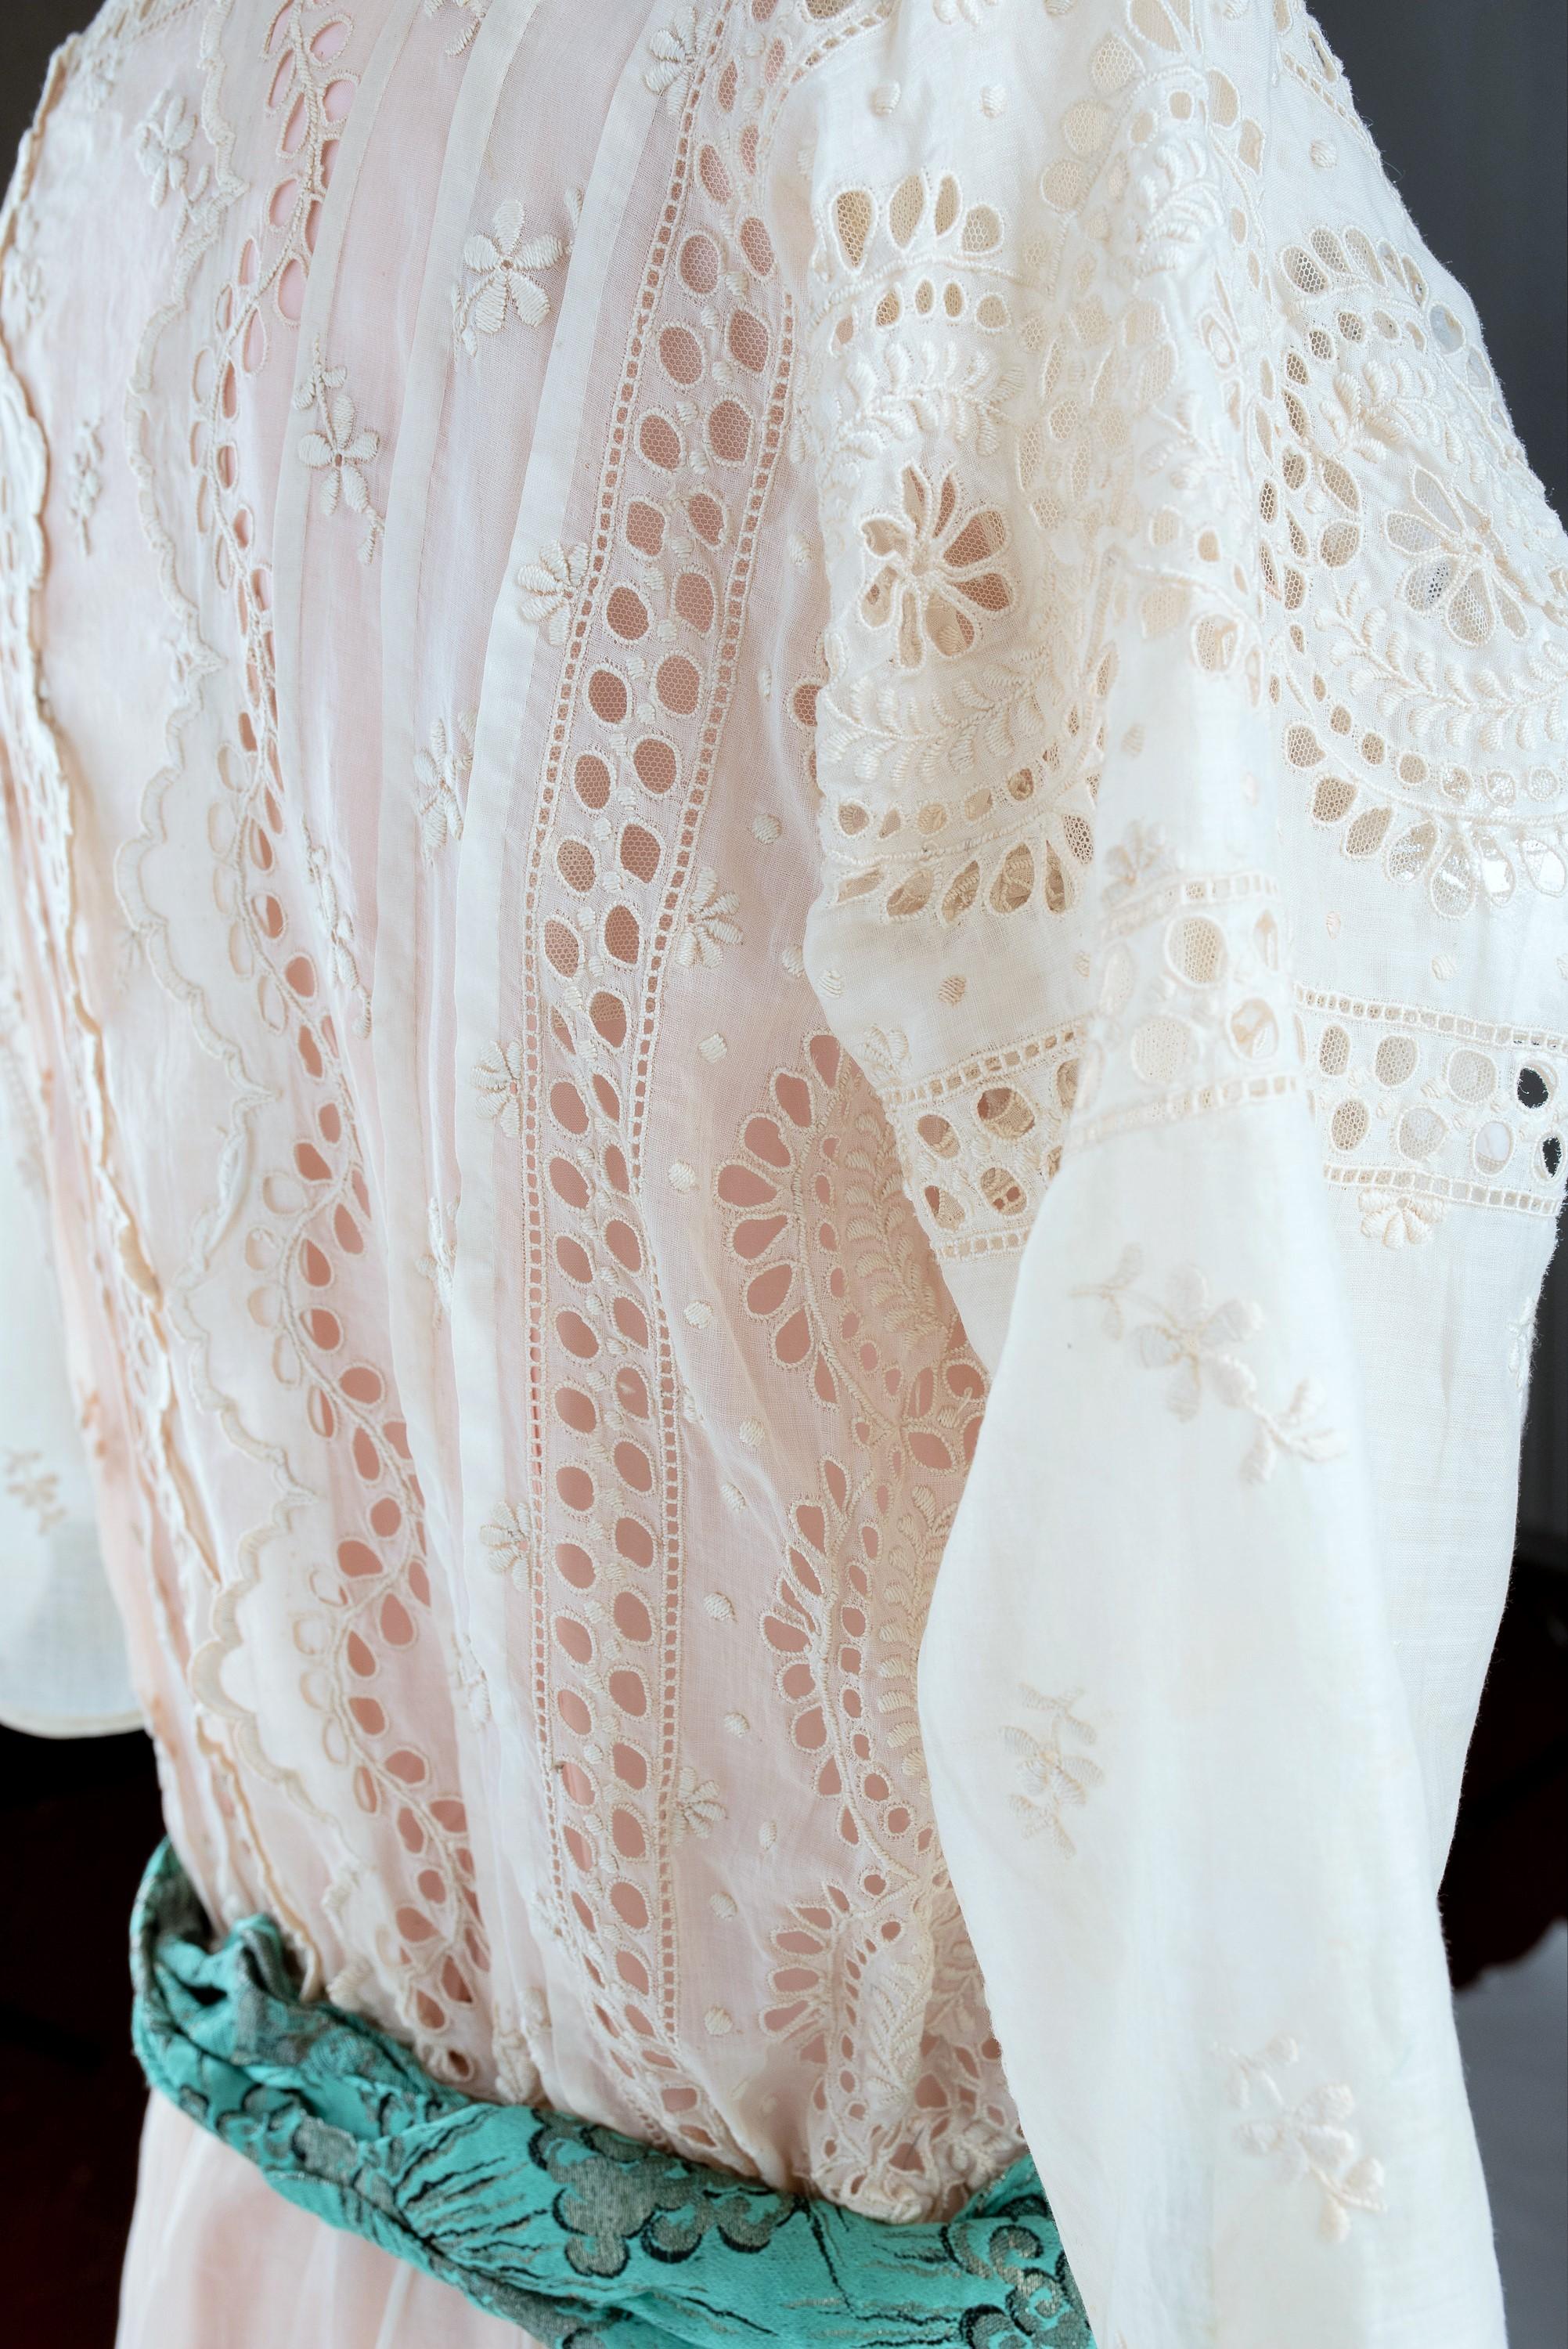 A silk pongee & White Embroidery Chiffon Summer Dress - France Circa 1920 For Sale 4